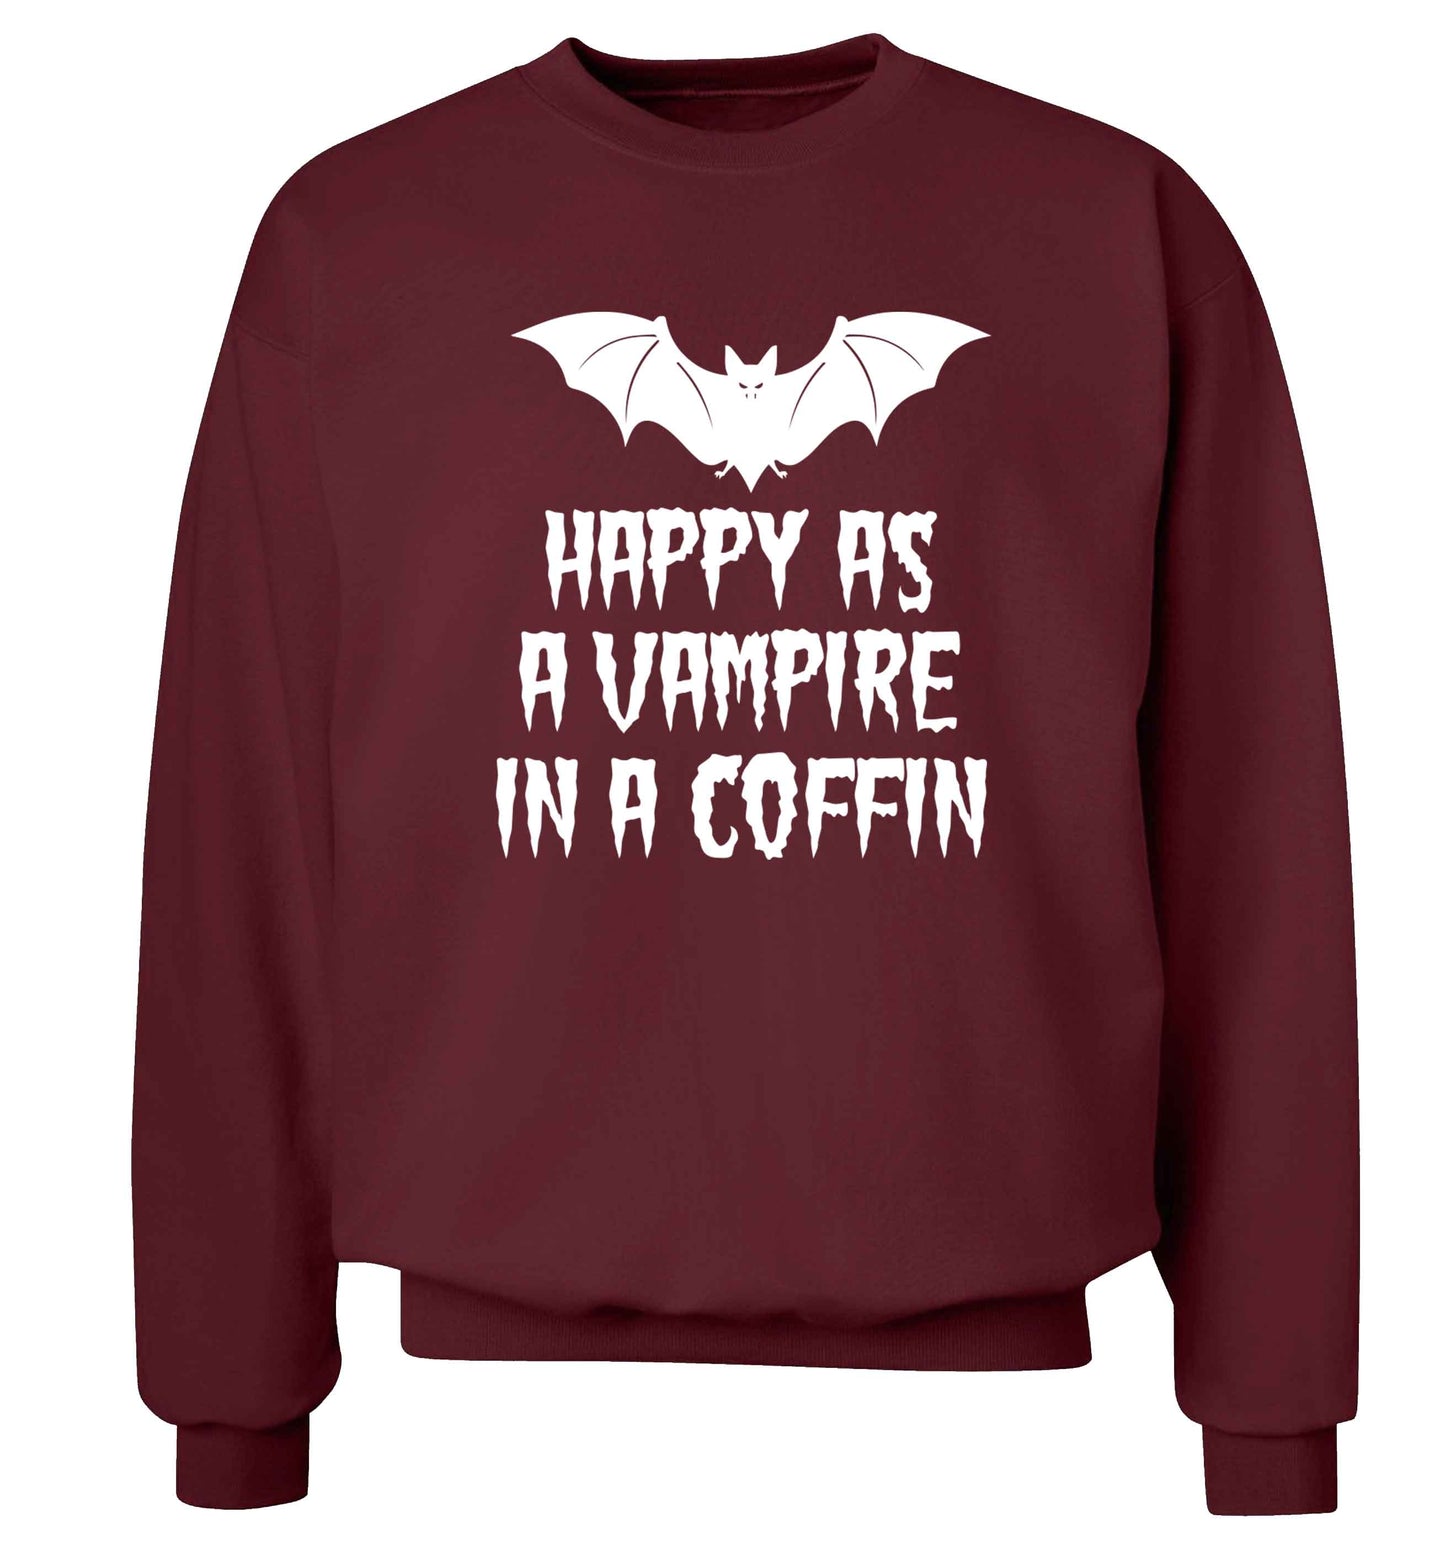 Happy as a vampire in a coffin Adult's unisex maroon Sweater 2XL